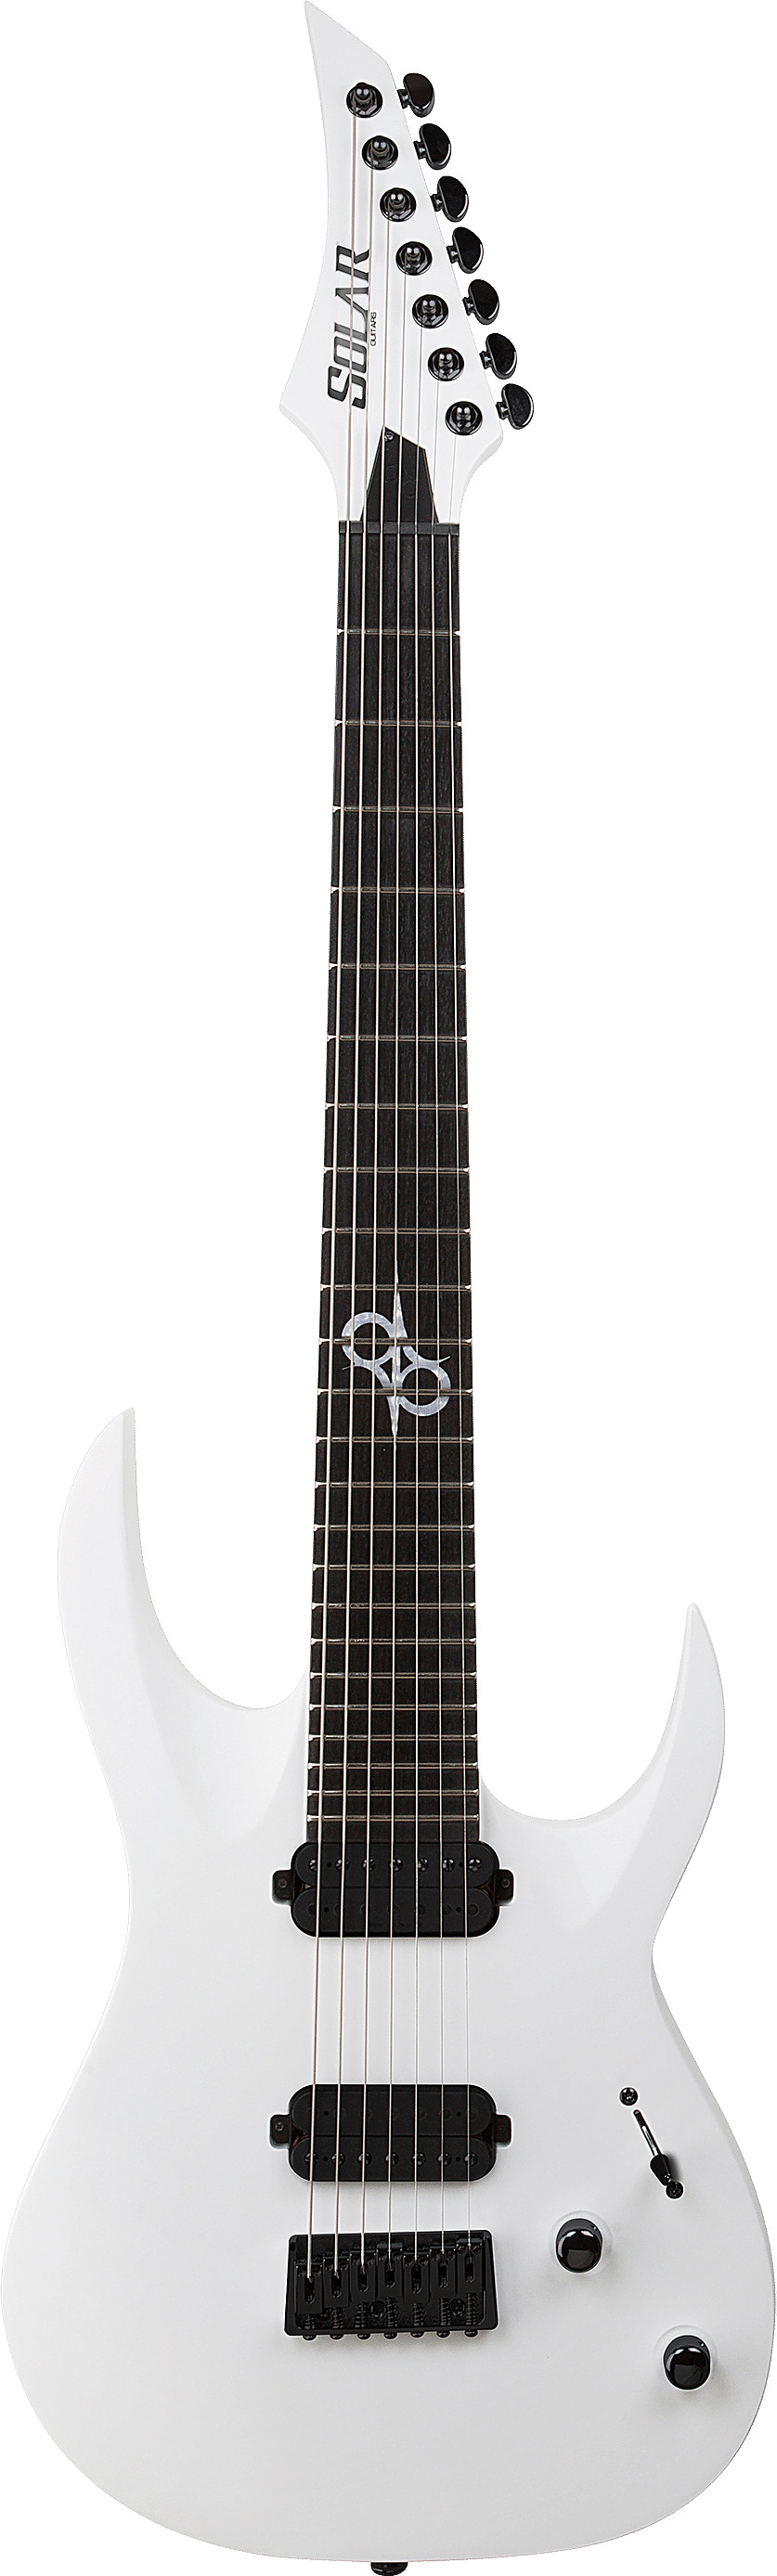 A2.7 by Solar Guitars